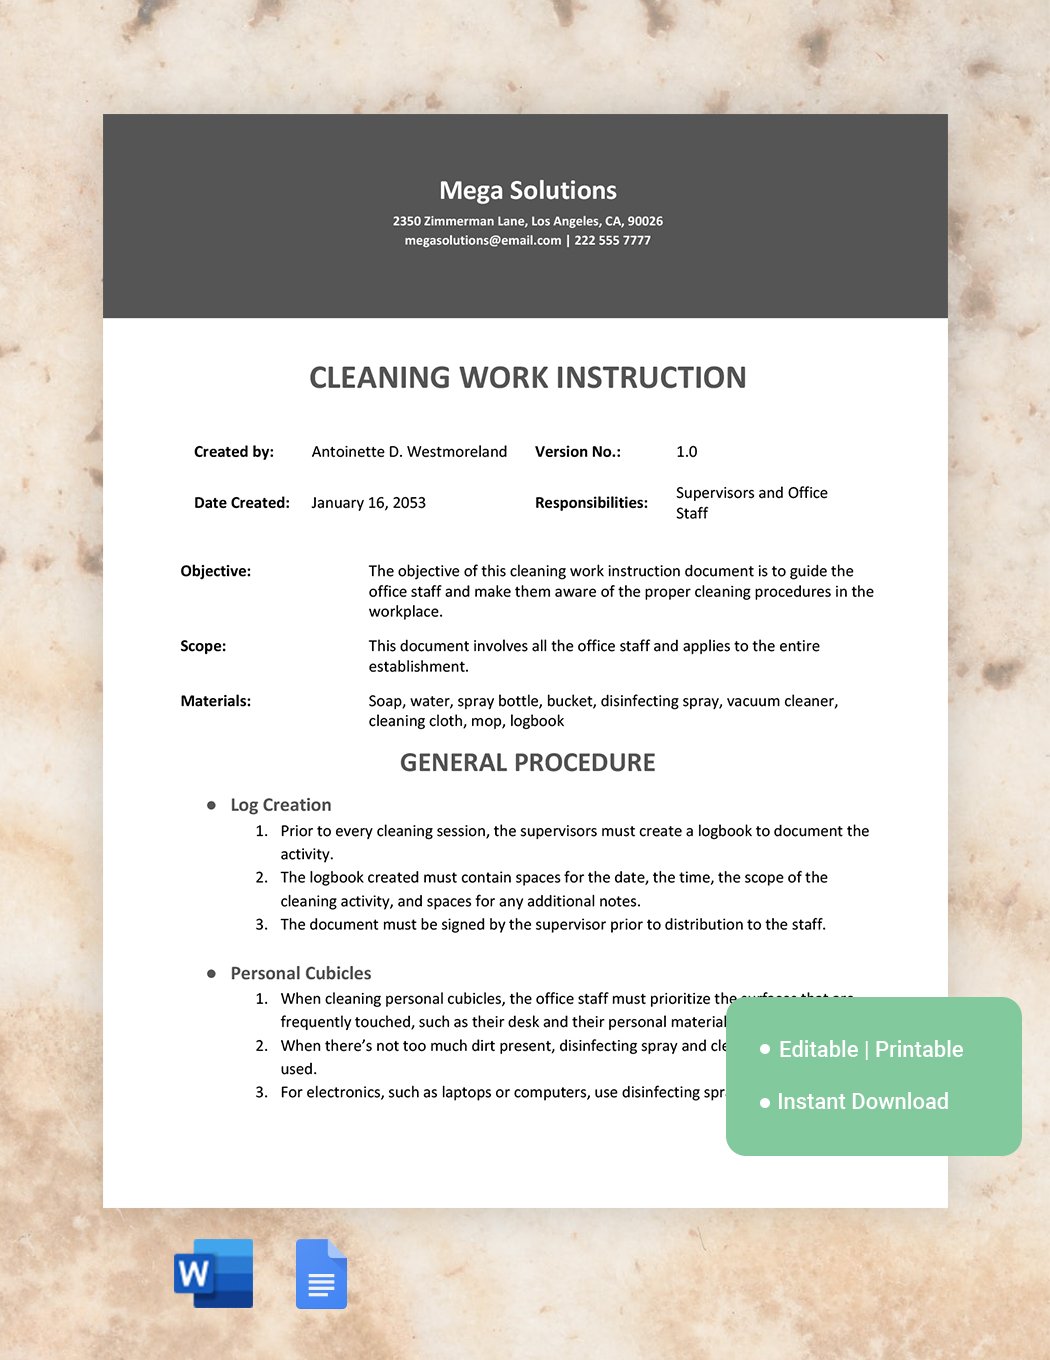 Cleaning Work Instruction Template in Word, Google Docs